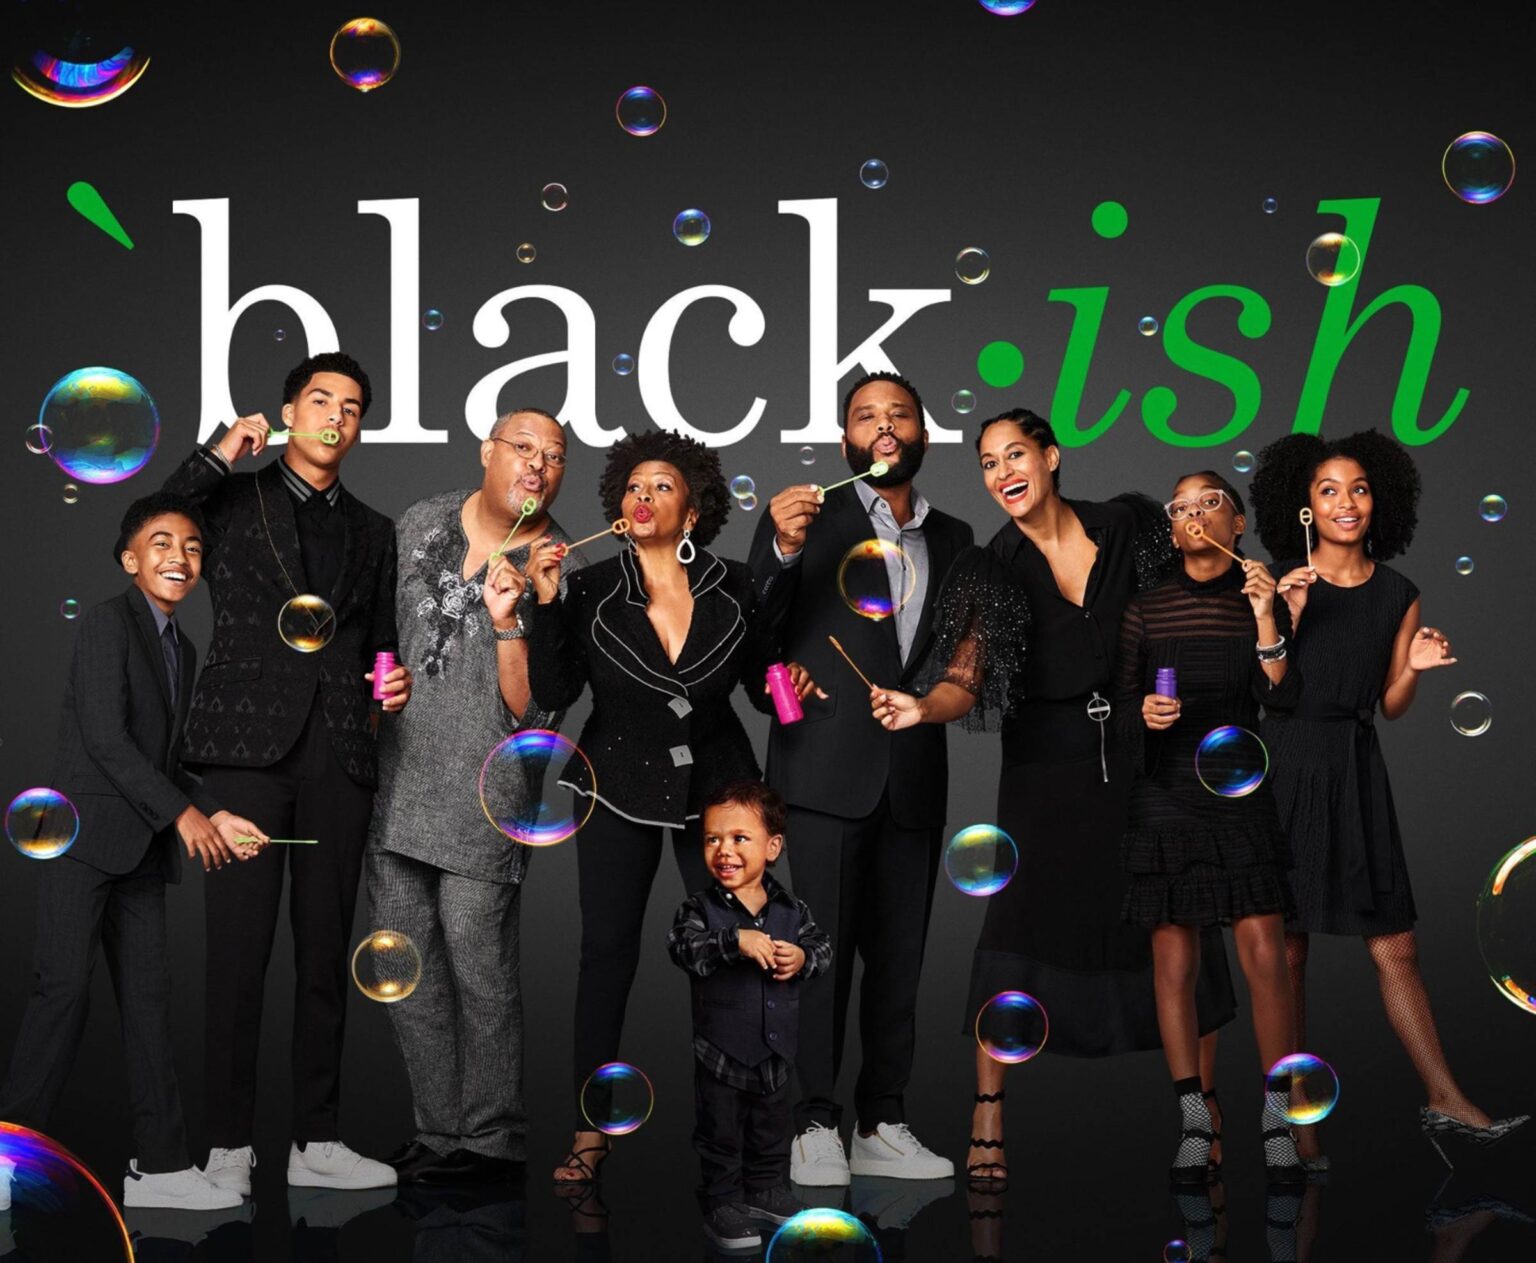 What's up with all these 'Black-ish' spinoffs? Read up on all the spinoffs no one asked for and let us know if you like them, or wish they'd stop.